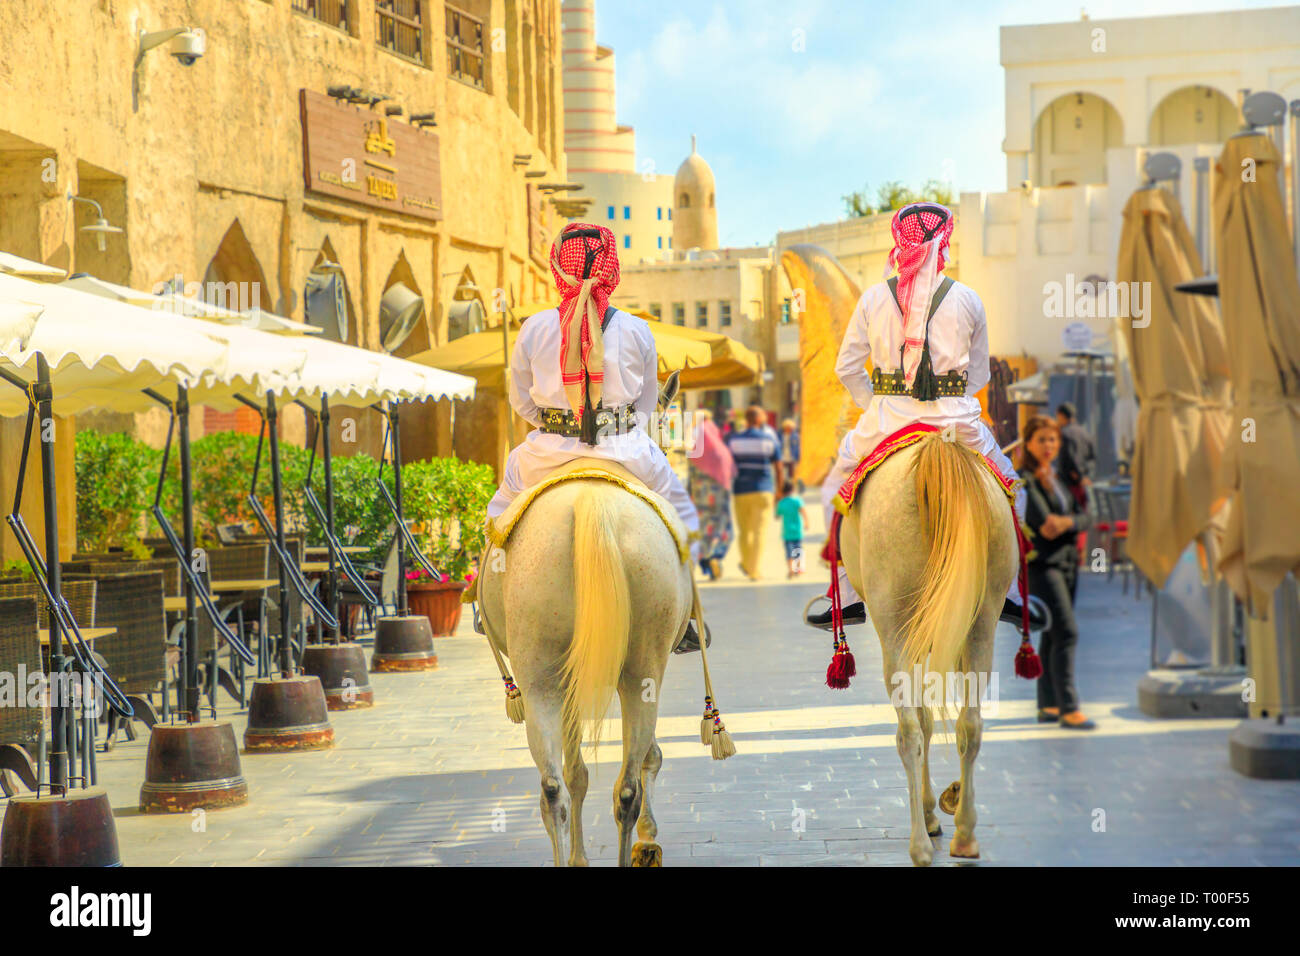 Doha, Qatar - February 20, 2019: back of heritage Police Officers in traditional 1940s Qatari uniform at old Souq Waqif riding white Arabian Horses on Stock Photo